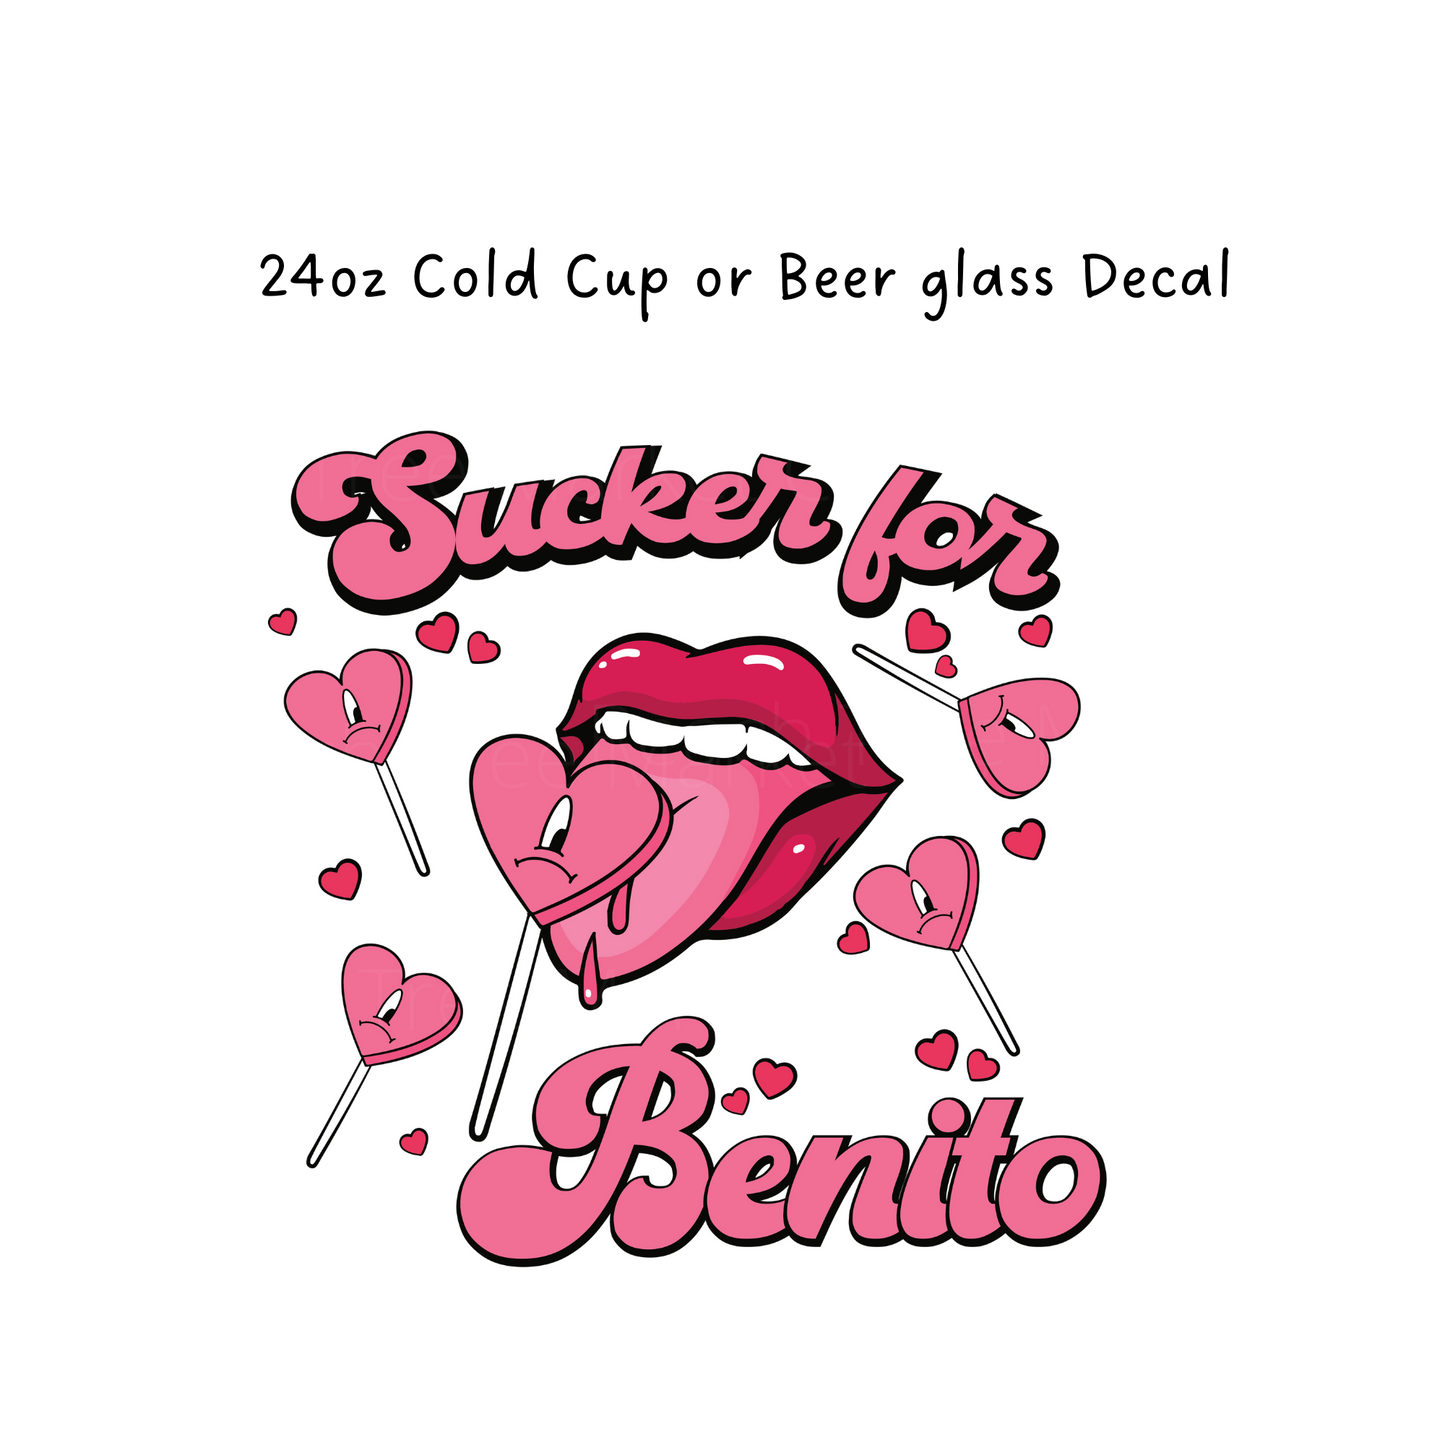 Sucker for Benito Cold Cup or Beer Glass Decal